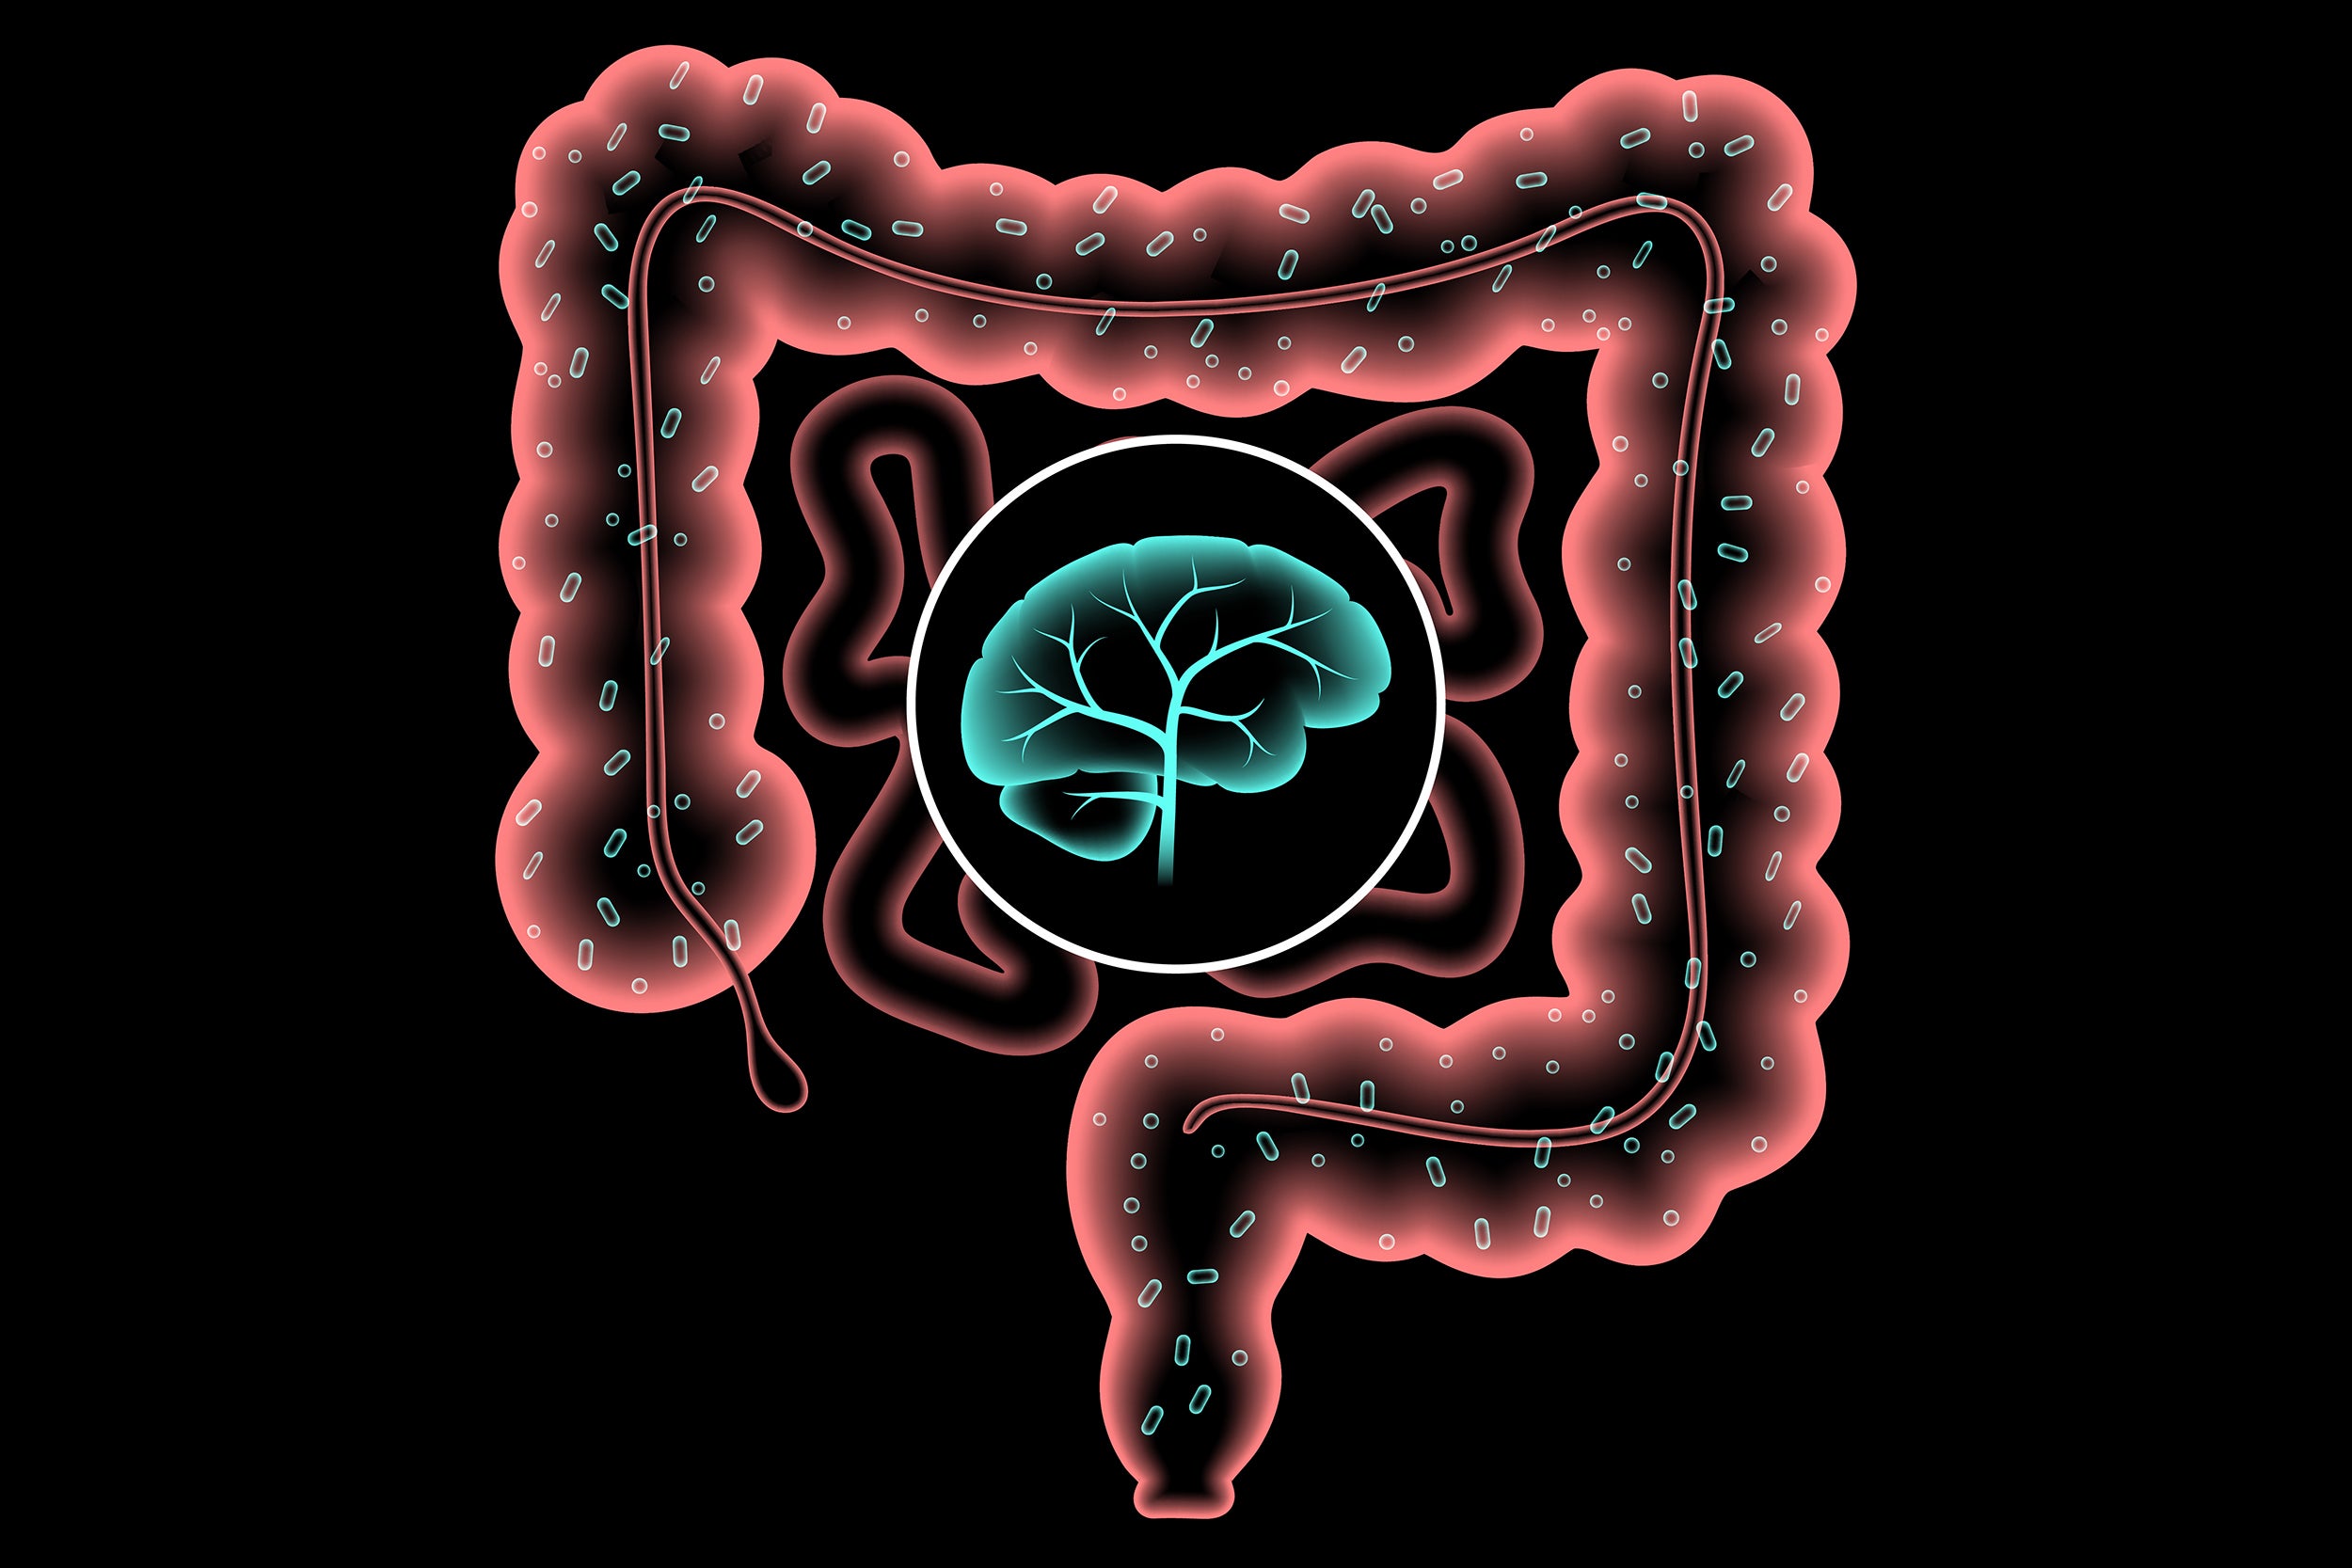 Illustration of gut brain connection and microbiome.